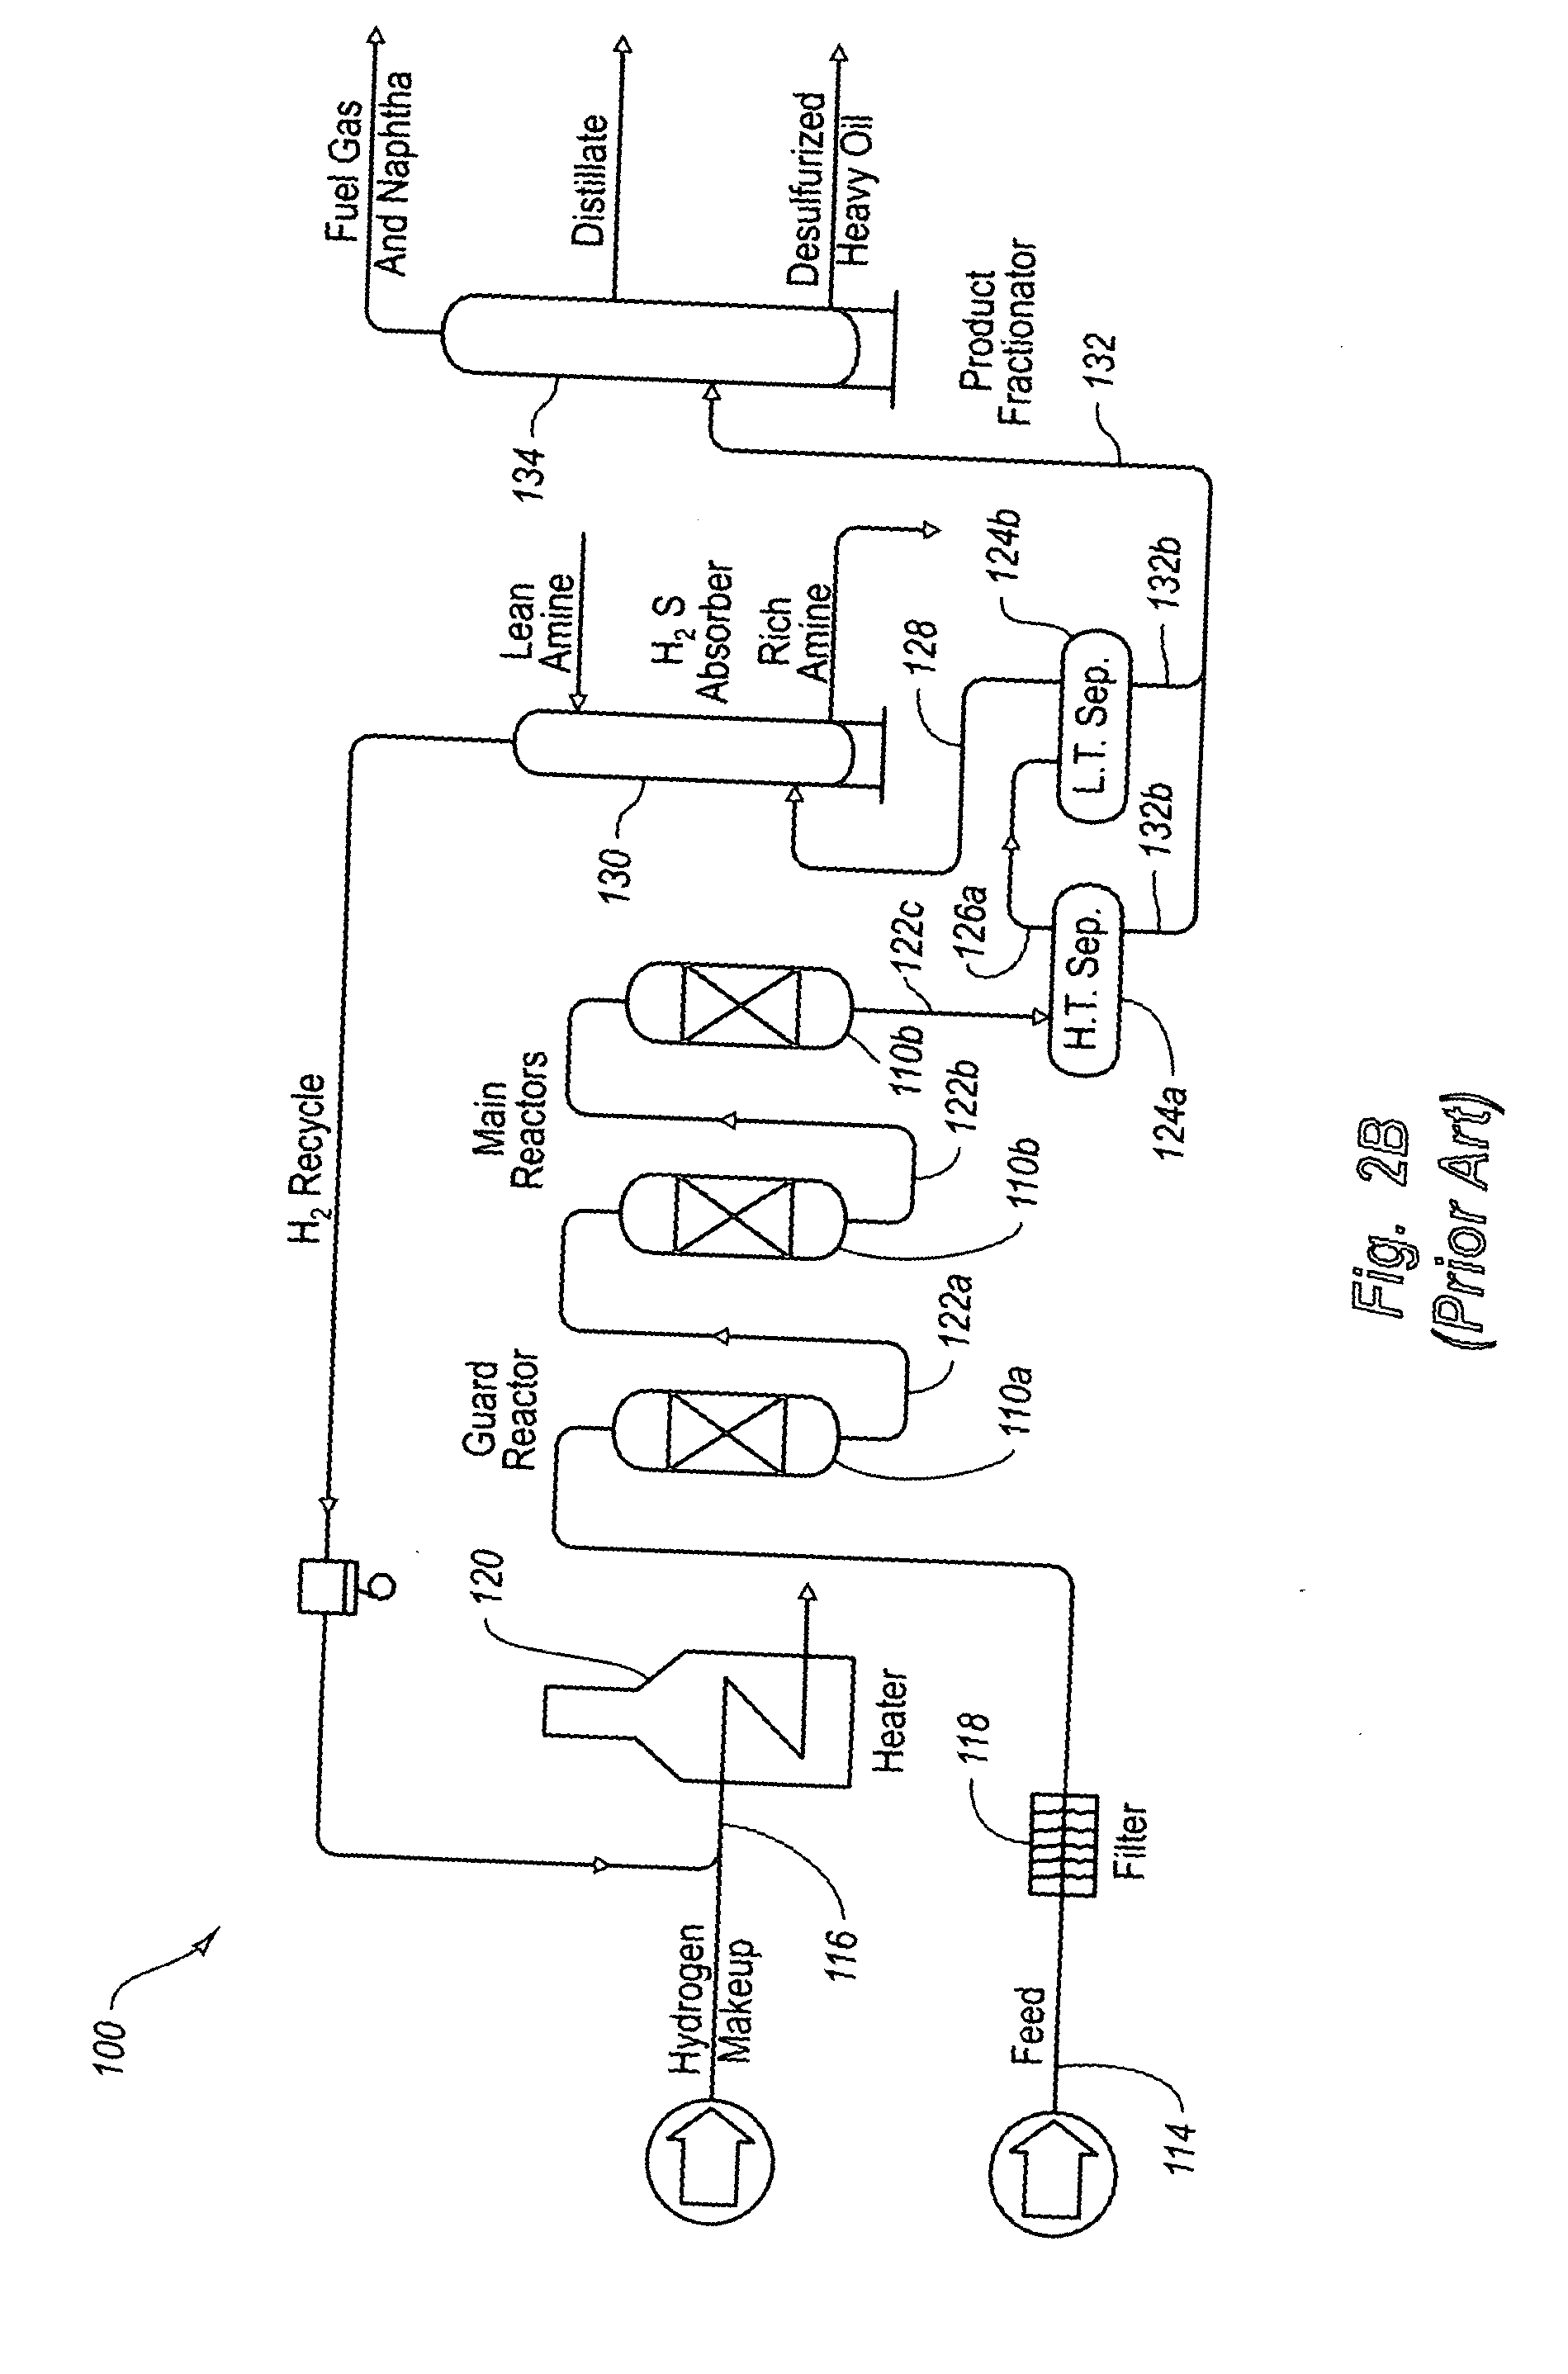 Fixed bed hydroprocessing methods and systems and methods for upgrading an existing fixed bed system